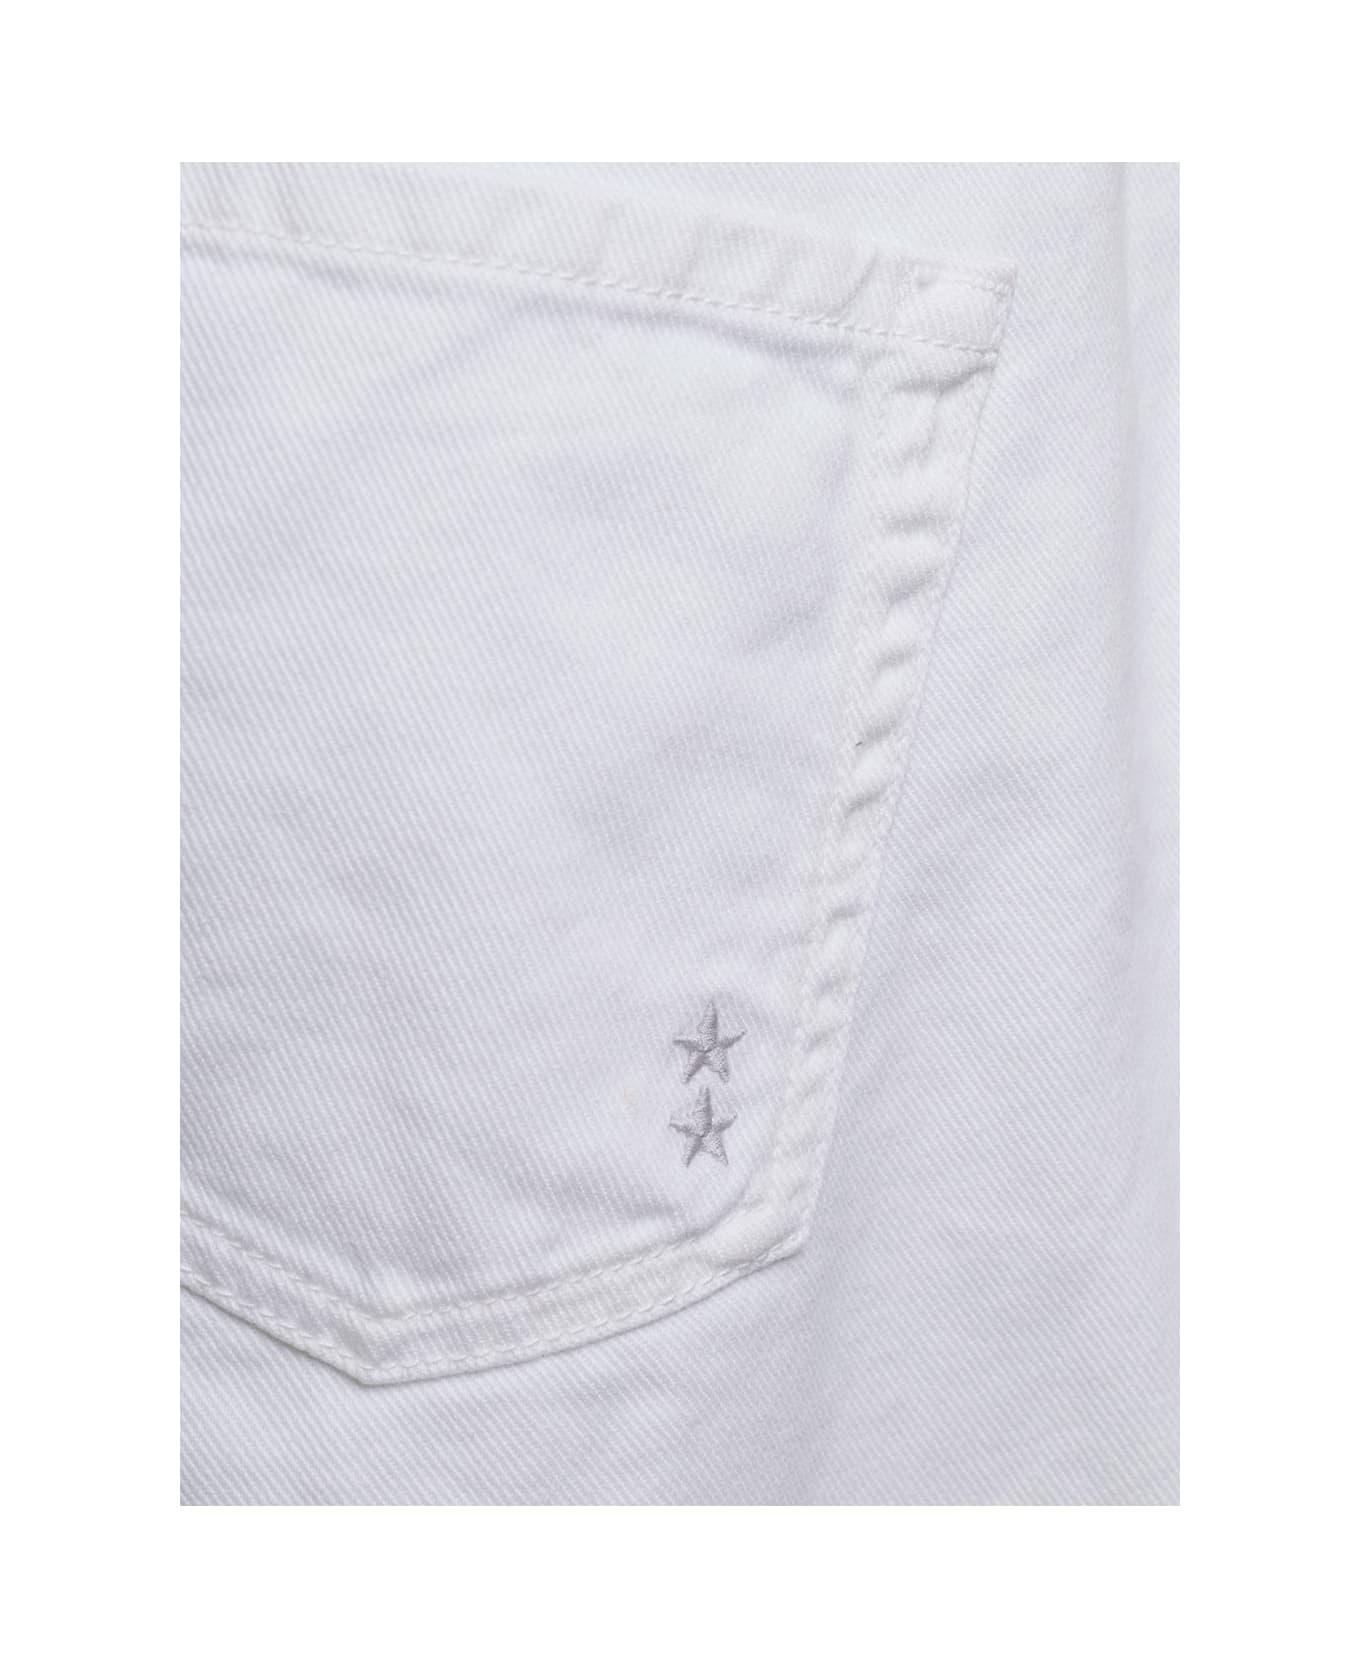 Icon Denim 'miki' White Jeans With Patch And Welt Pockets In Cotton Denim Woman - White